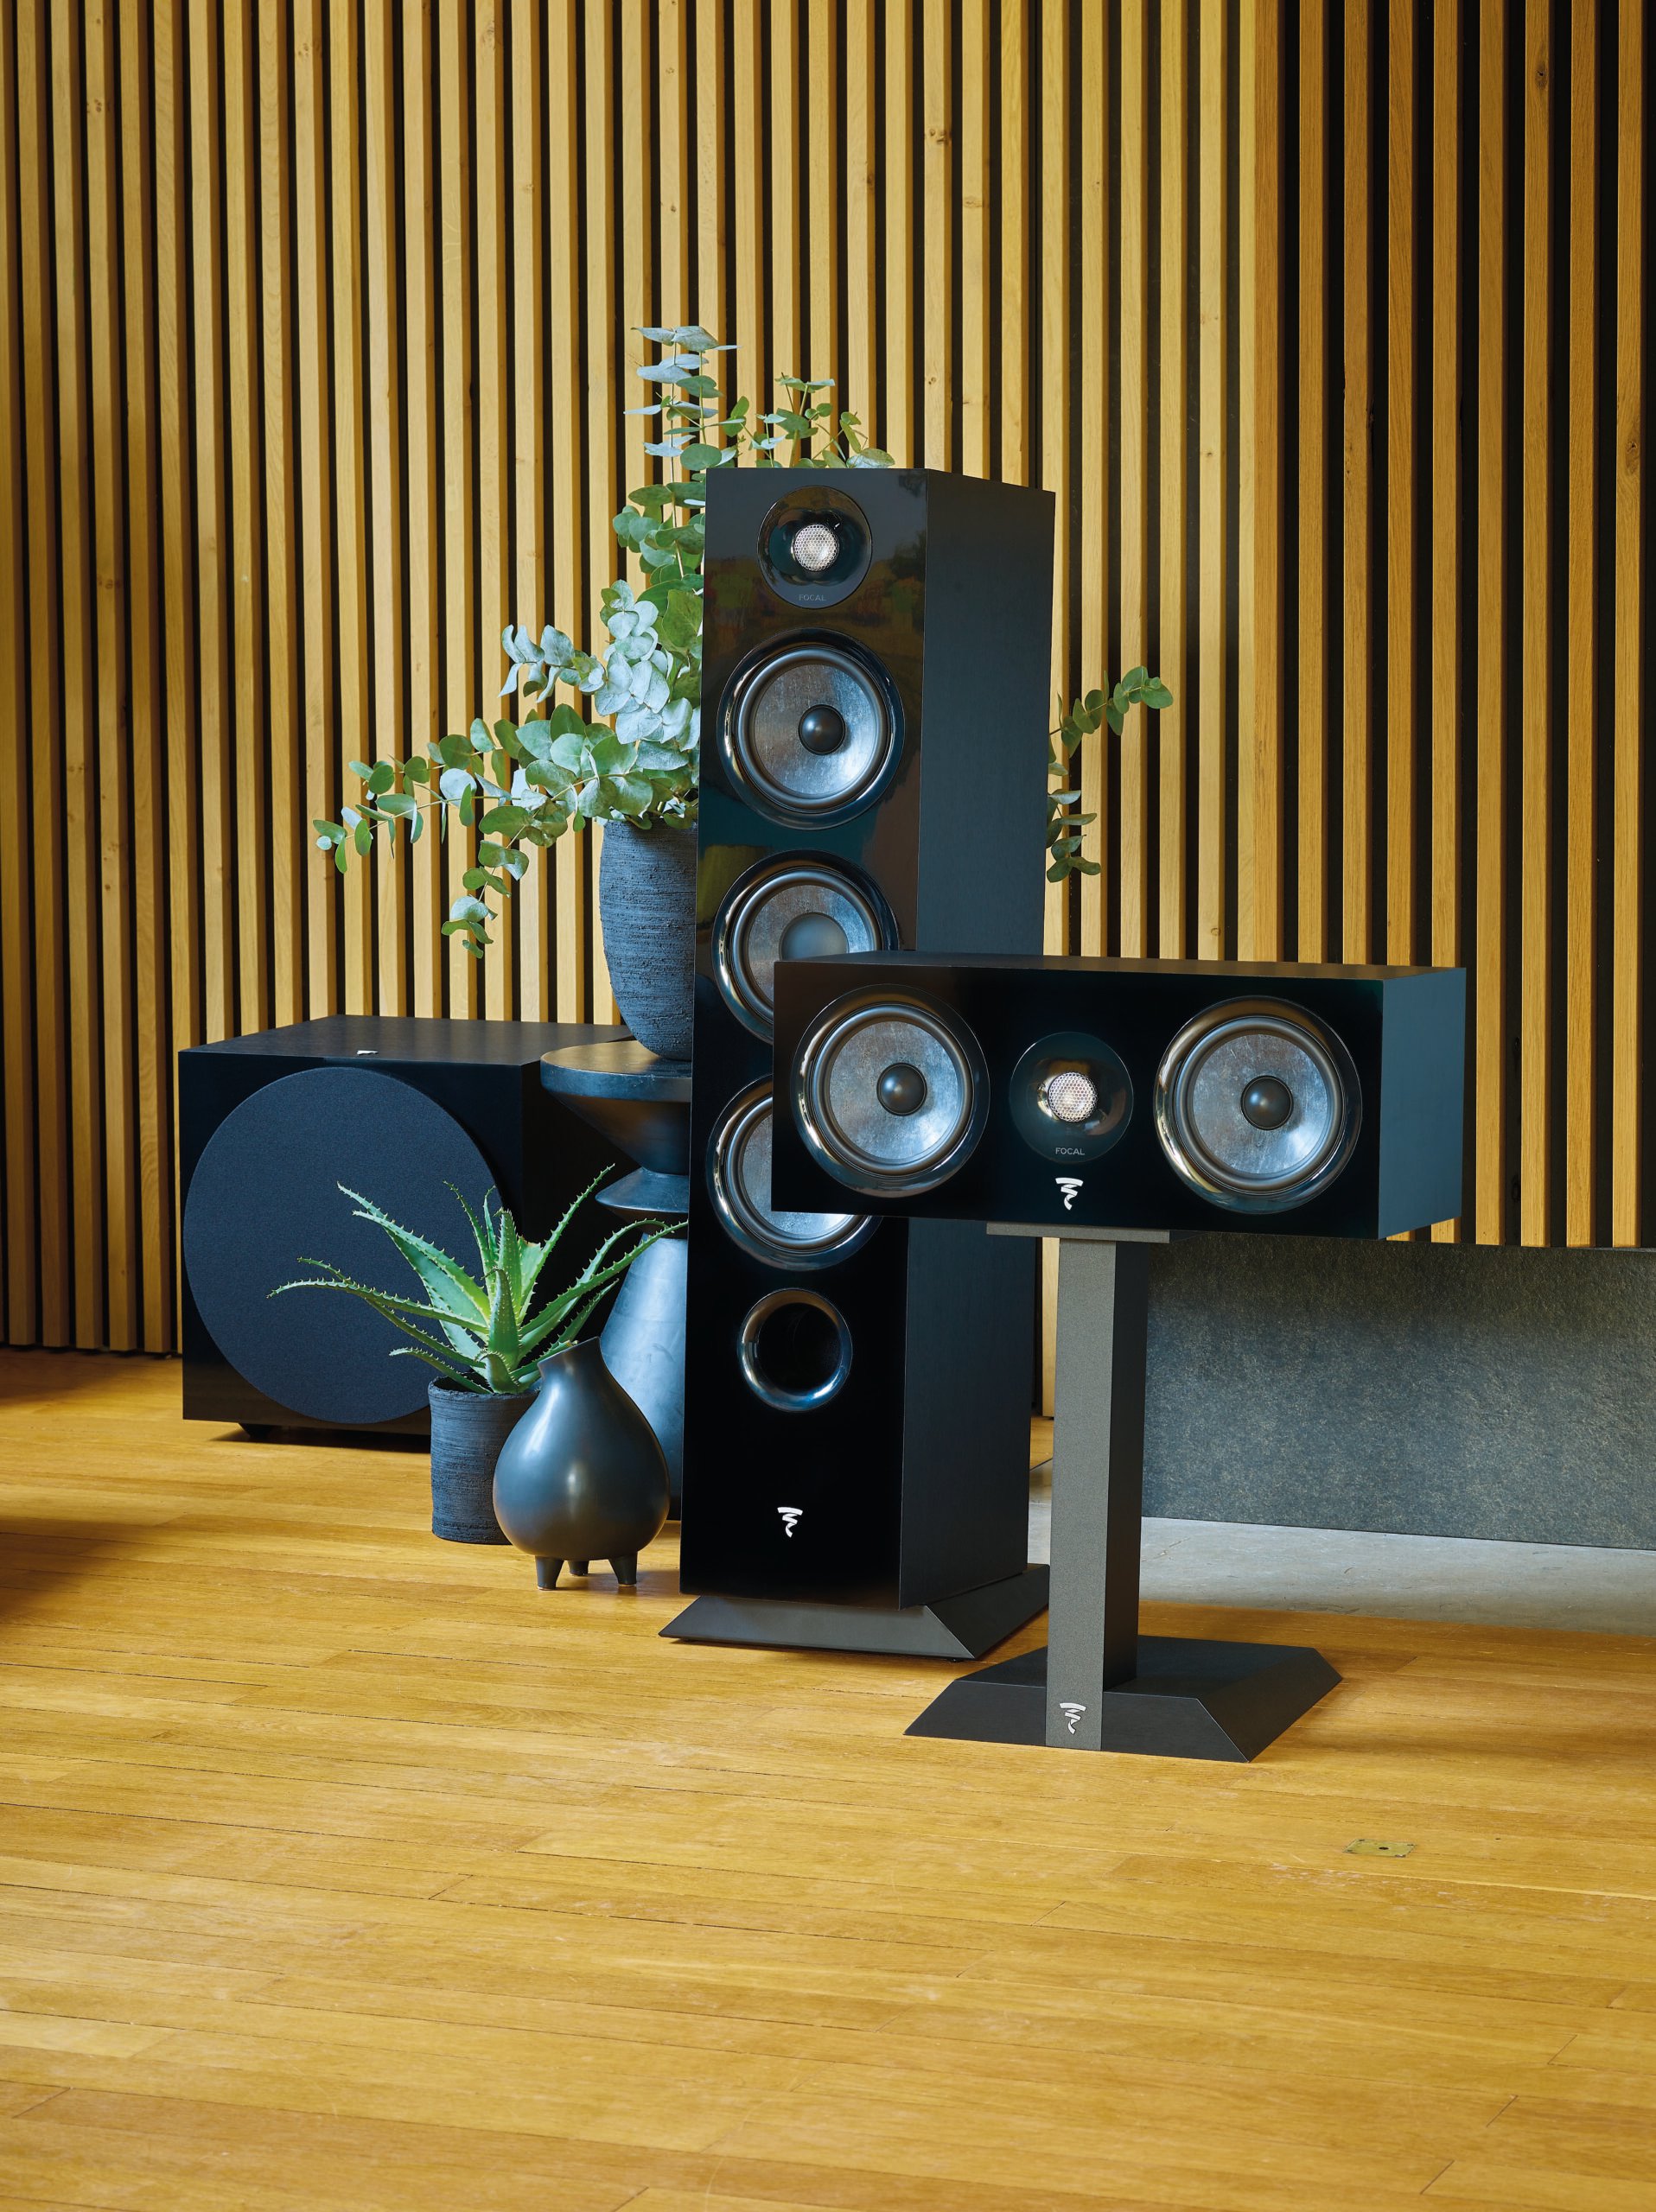 Focal Chora 826-D 5.1.2 Speaker Review • Home Theater Forum